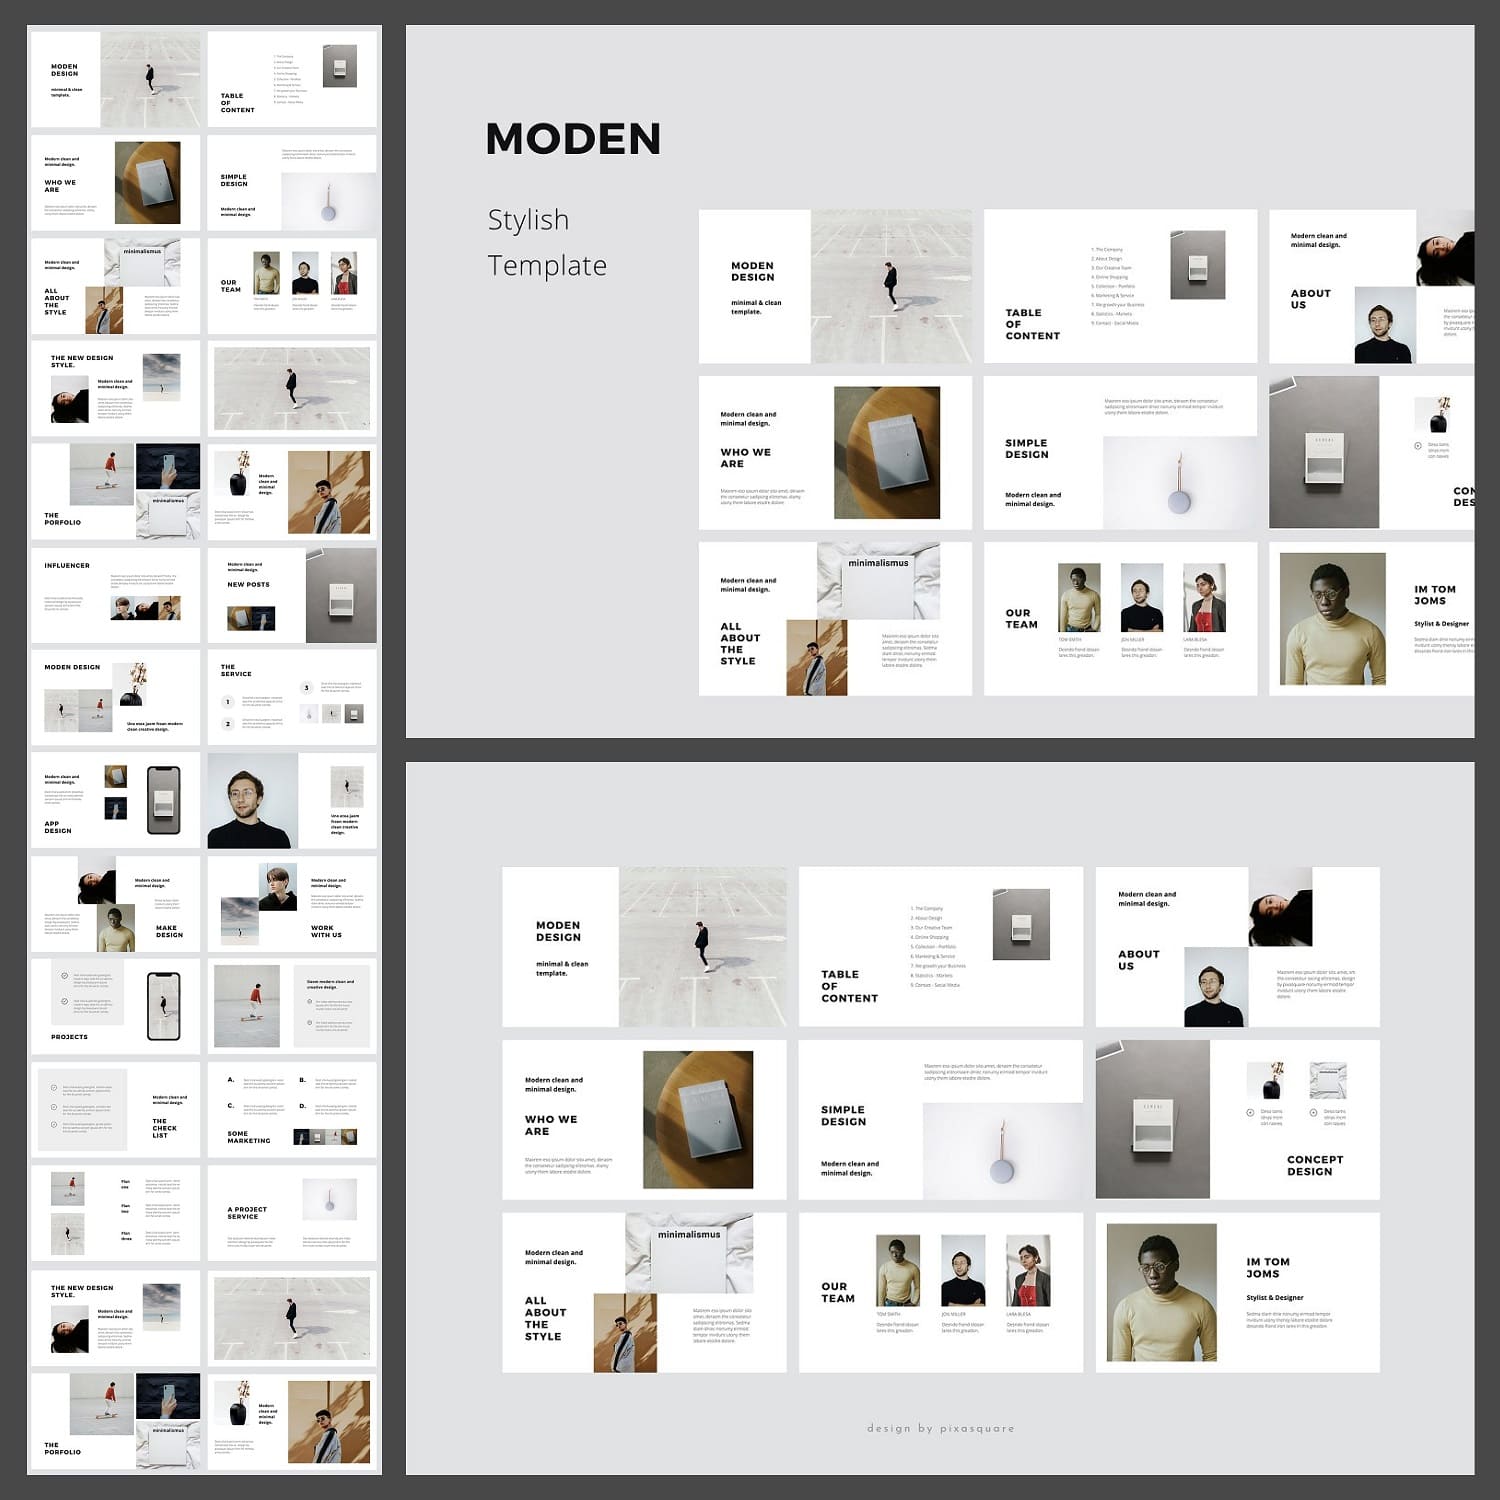 Three blocks of template slides in the style of the Moden keynote.